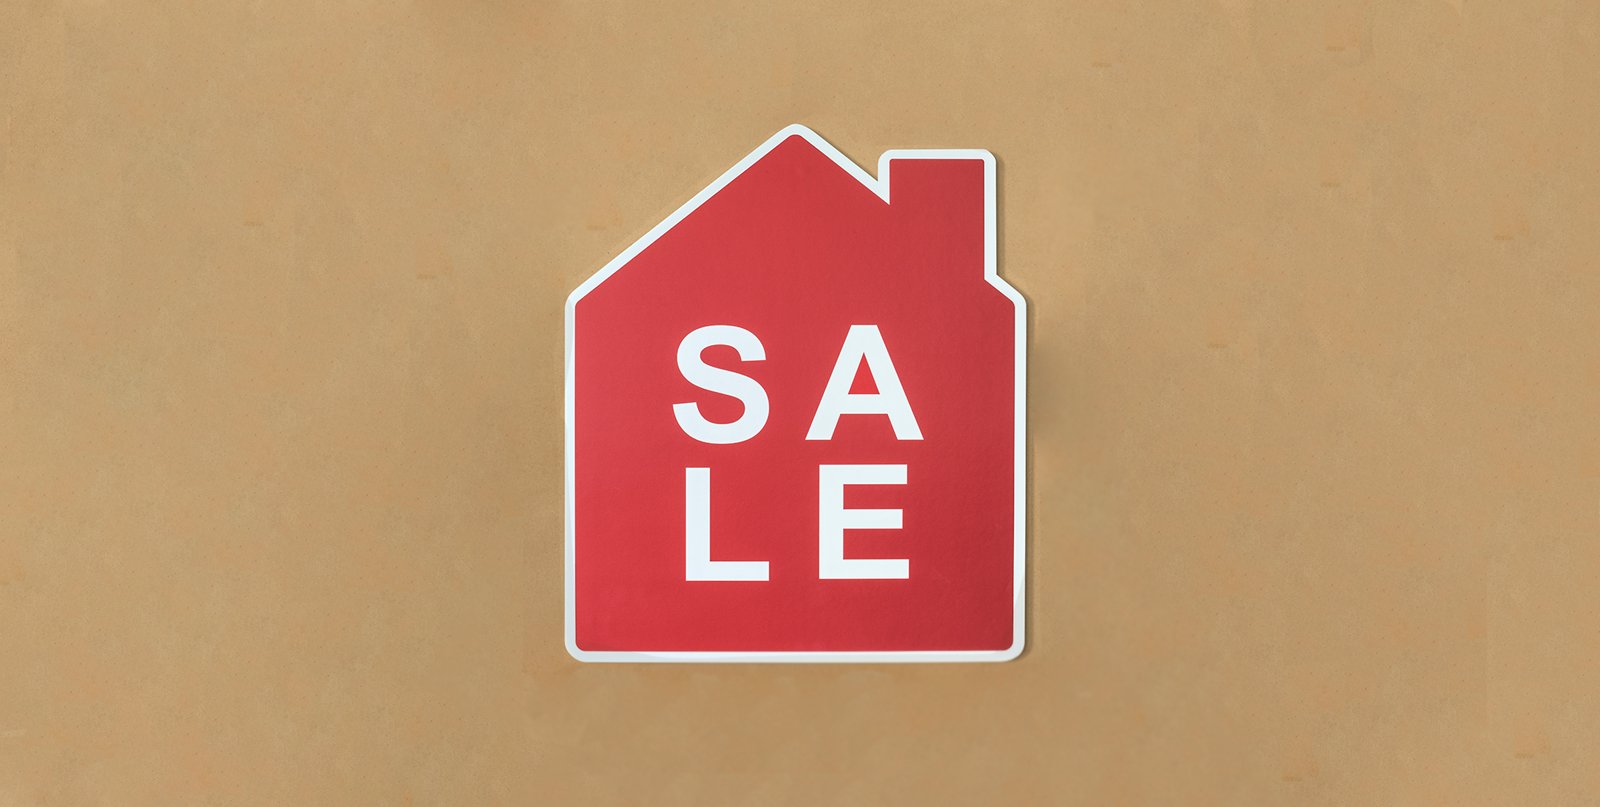 For Sale House Banner